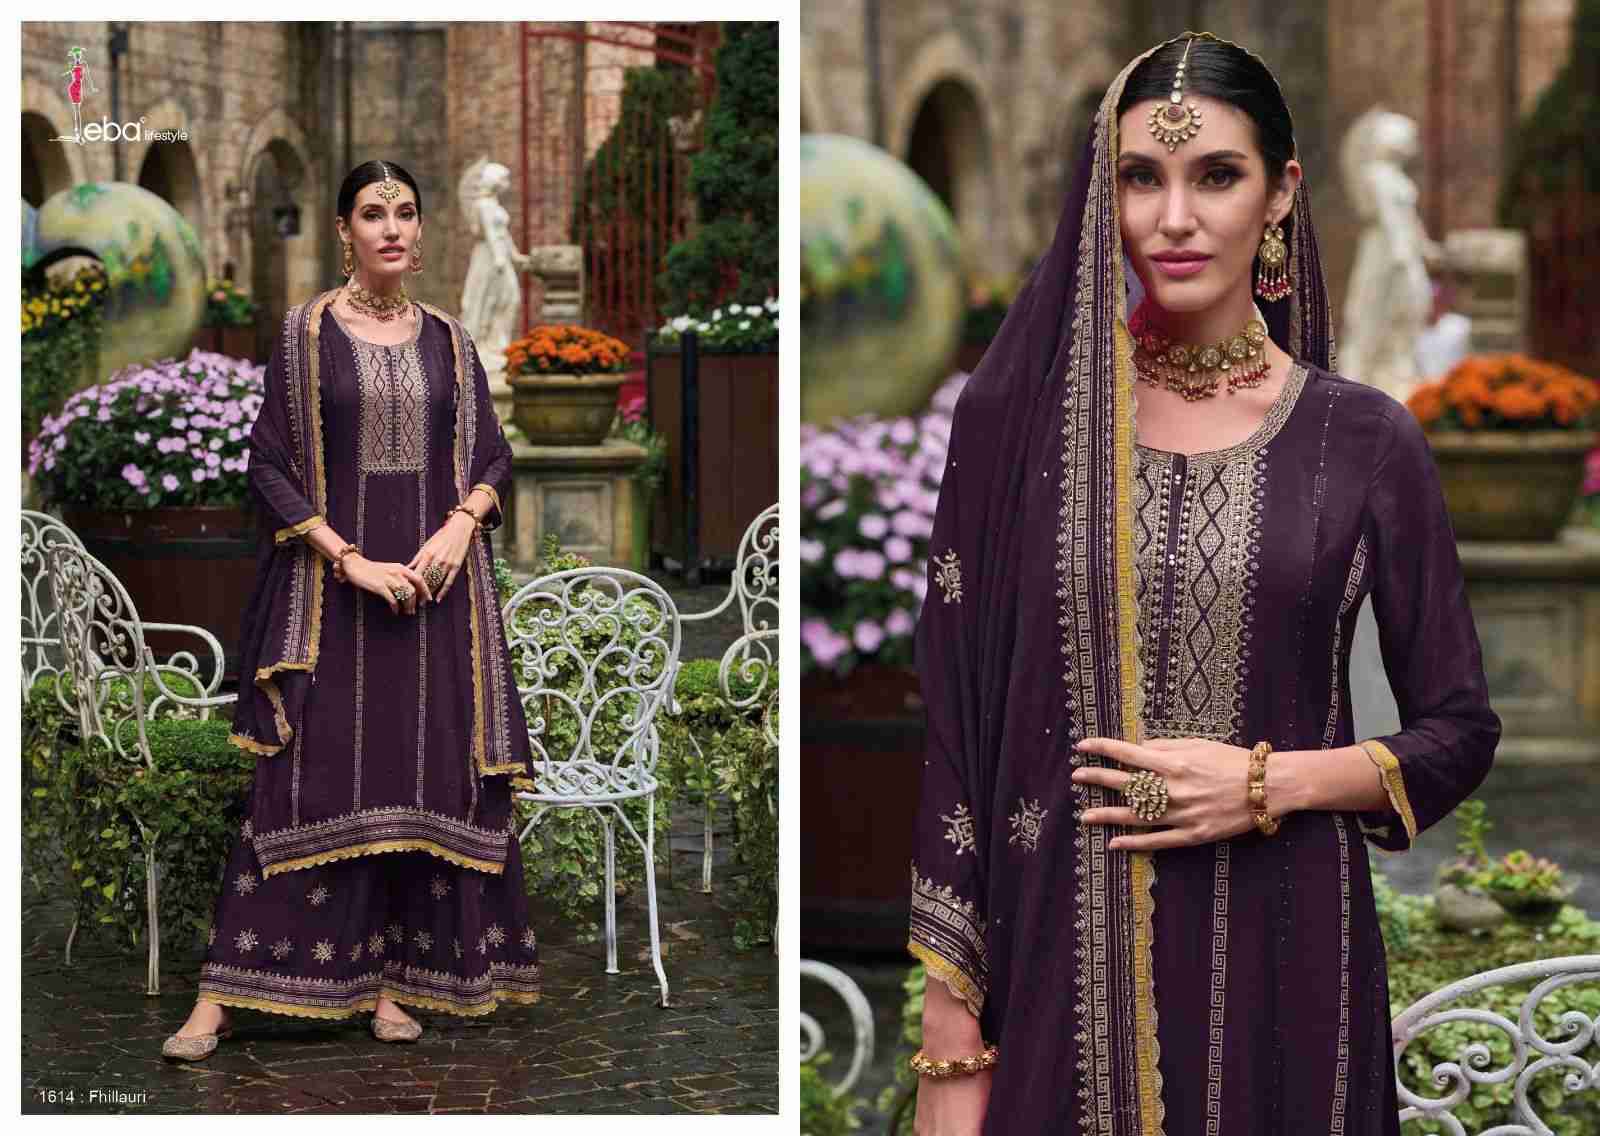 Fhillauri By Eba Lifestyle 1612 To 1615 Series Designer Sharara Suits Beautiful Stylish Fancy Colorful Party Wear & Occasional Wear Chinnon With Embroidery Dresses At Wholesale Price